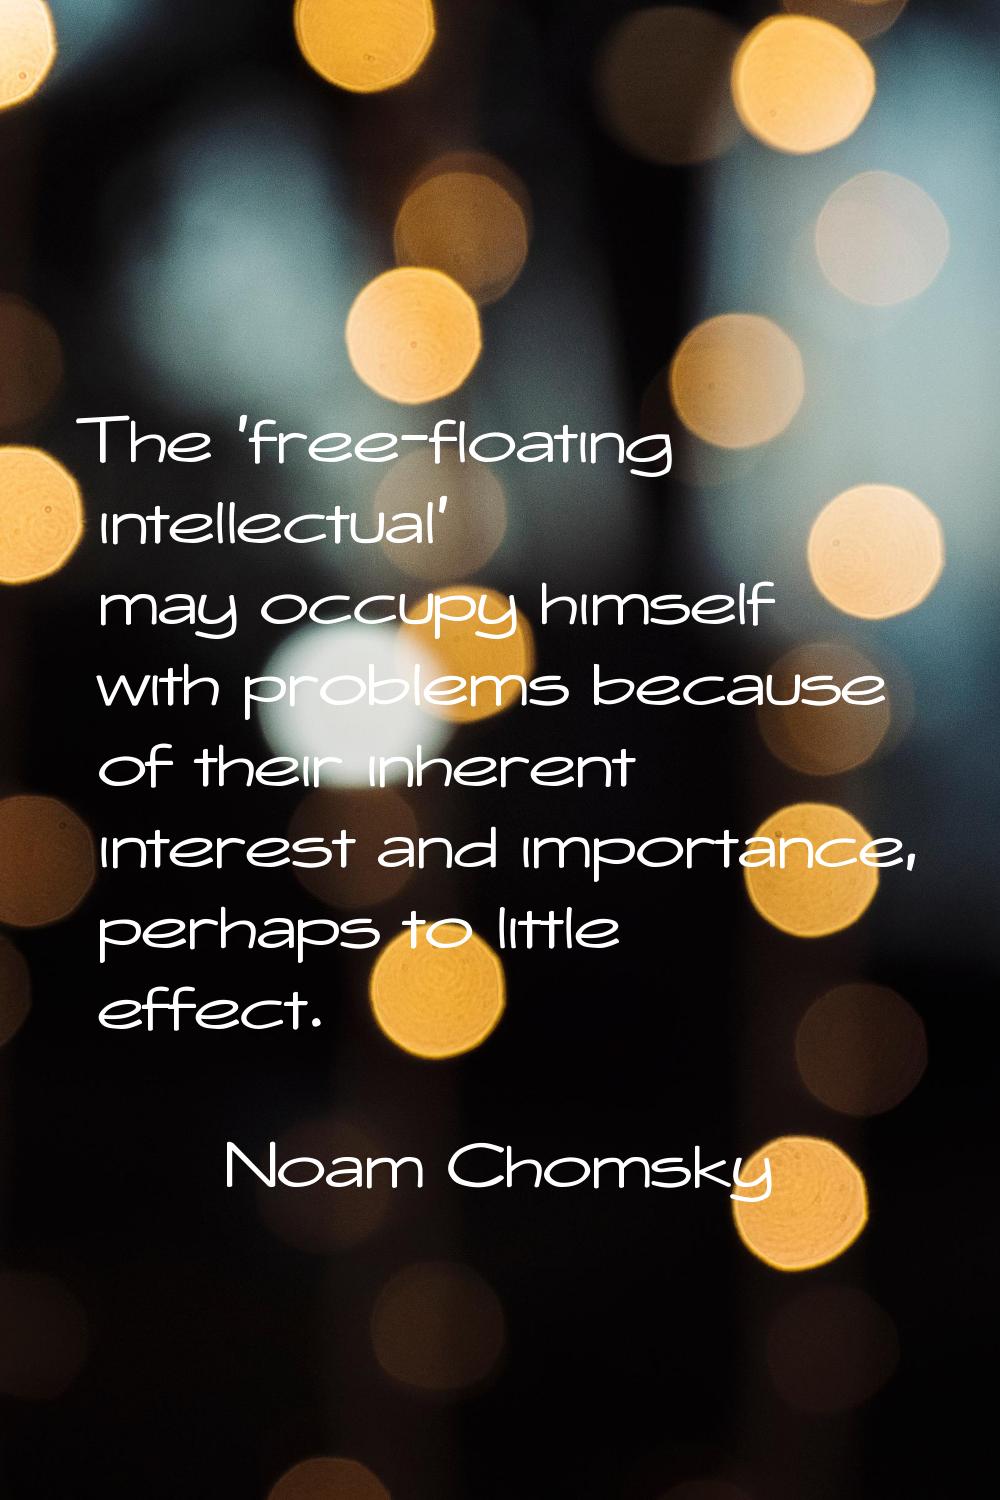 The 'free-floating intellectual' may occupy himself with problems because of their inherent interes